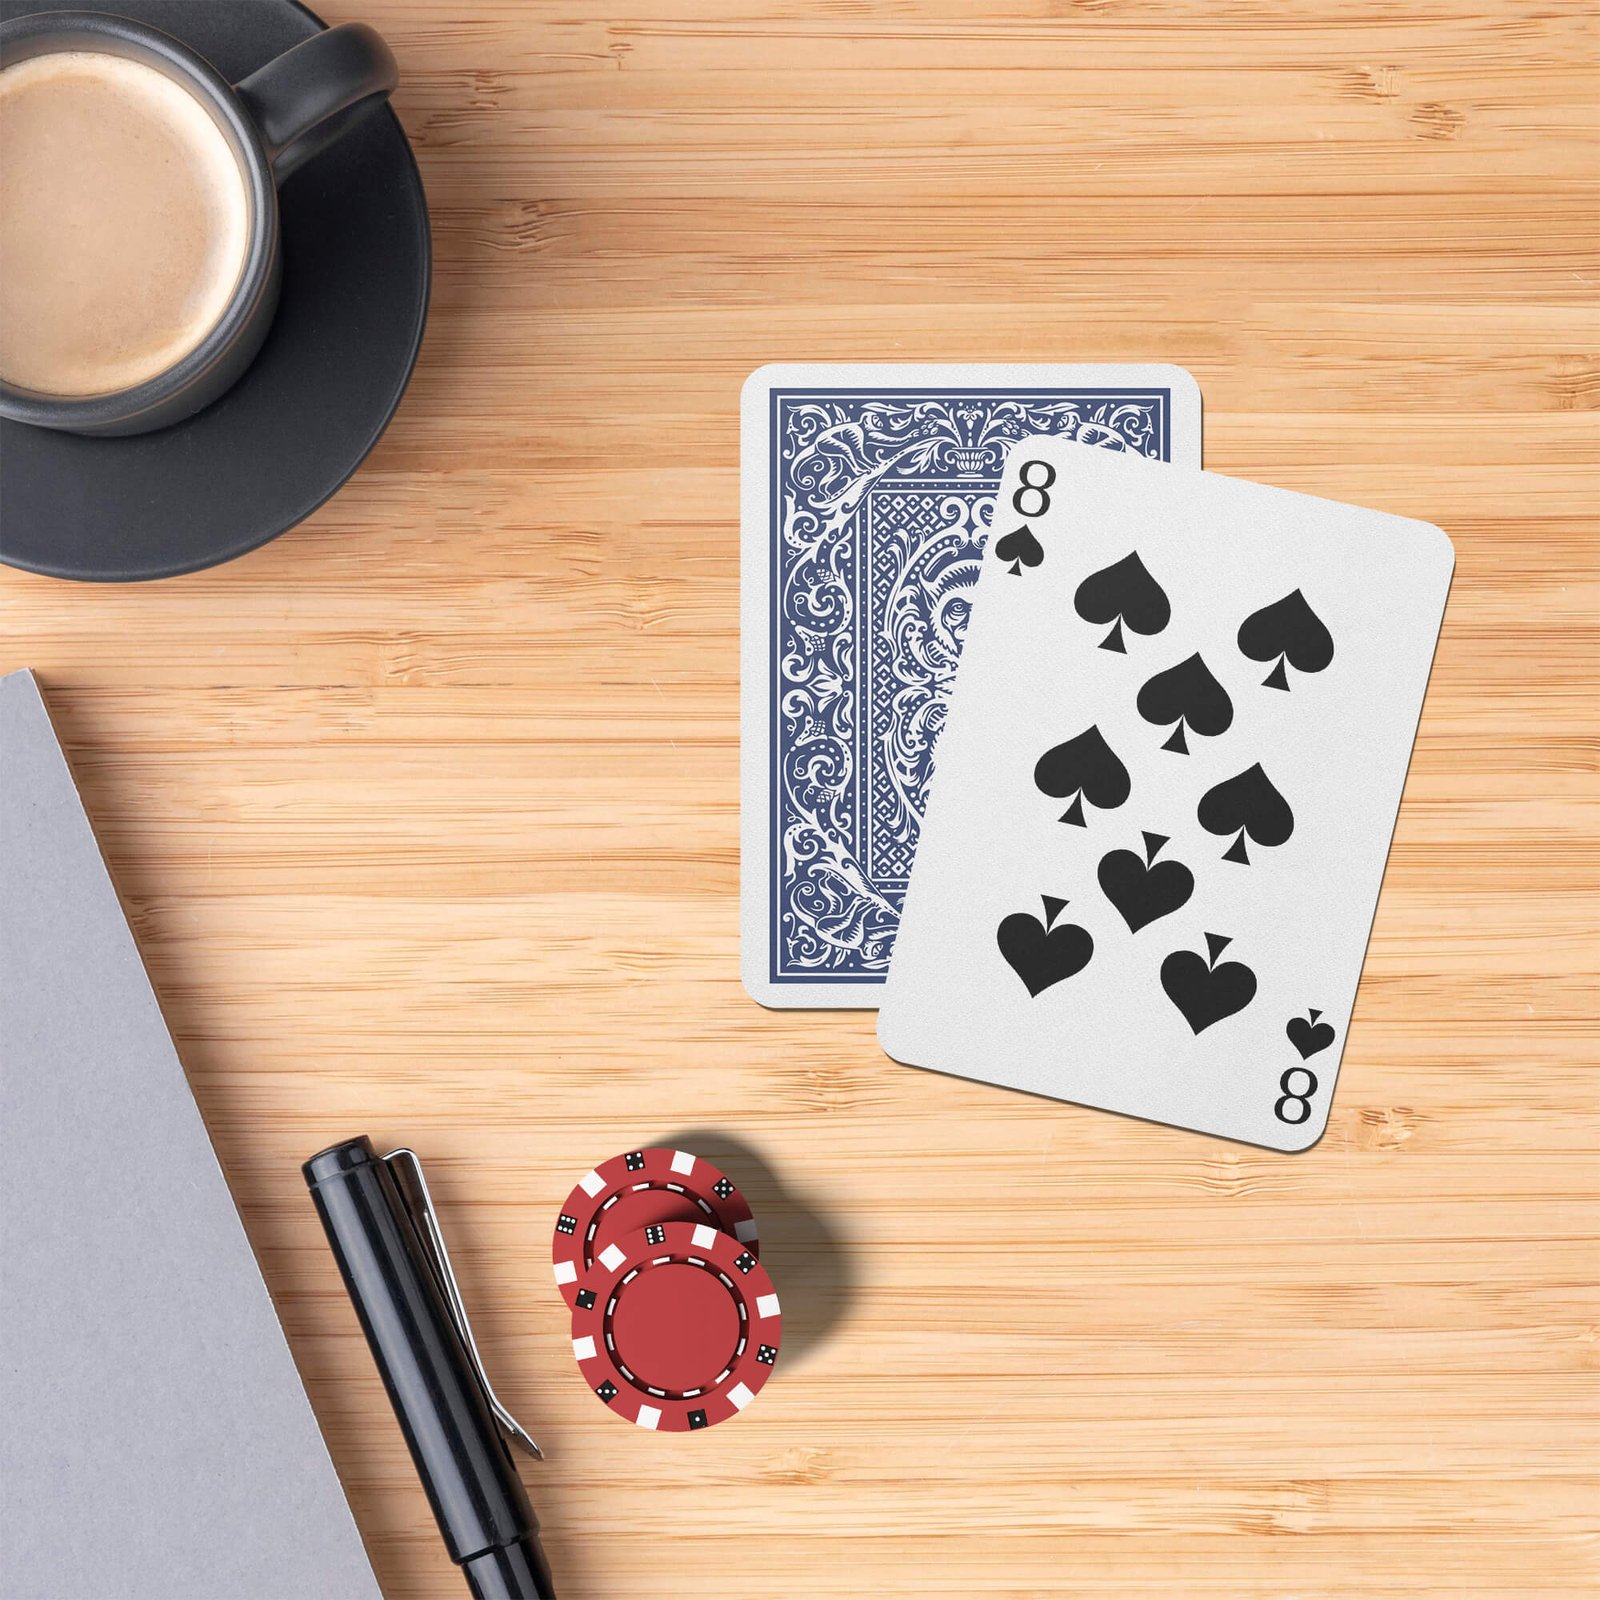 Free Card Game Mockup PSD Template